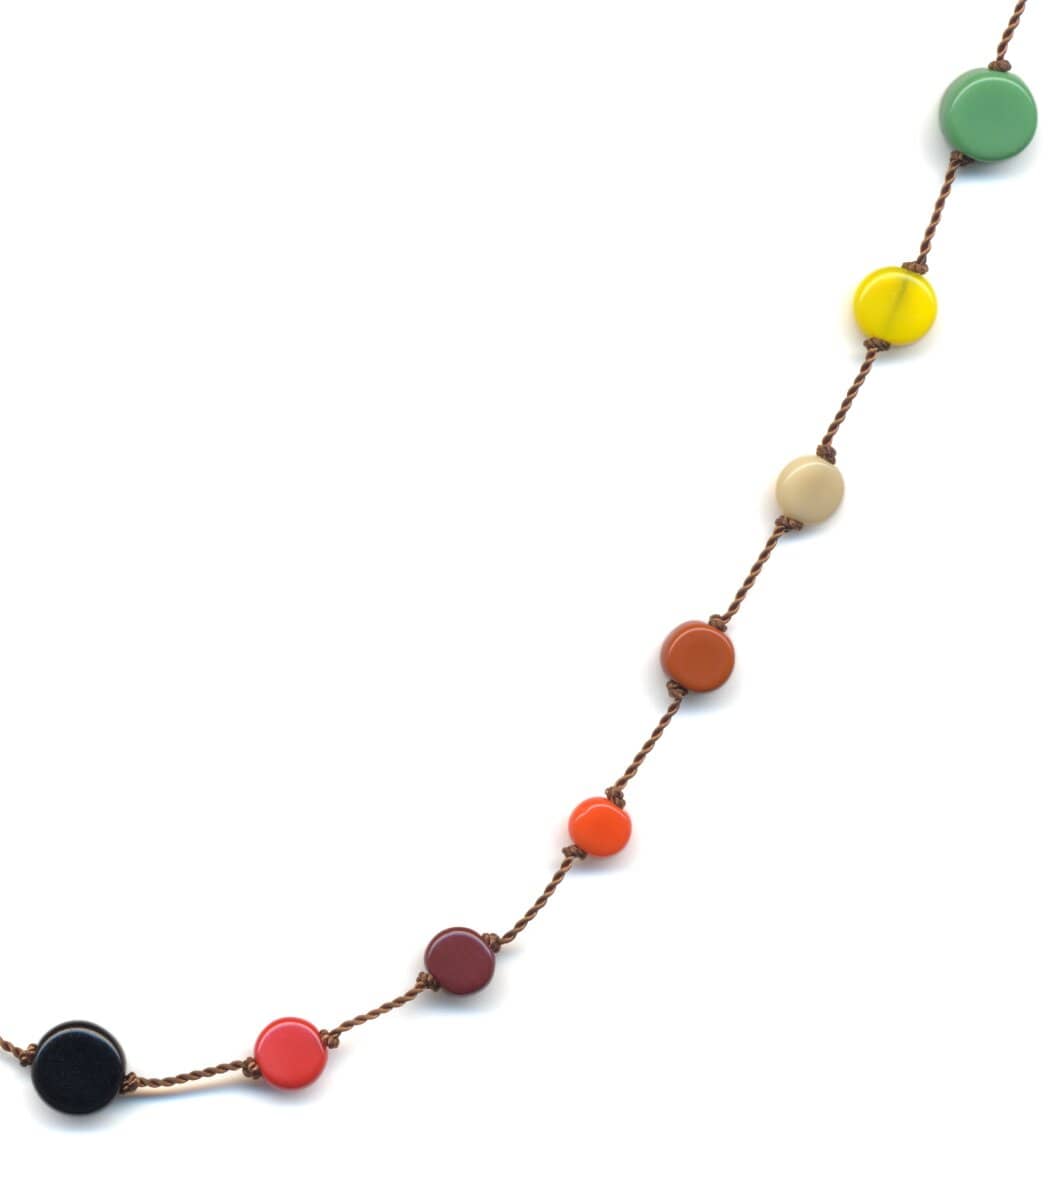 Irk Jewelry I. Ronni Kappos N1908 Multi Circles Necklace